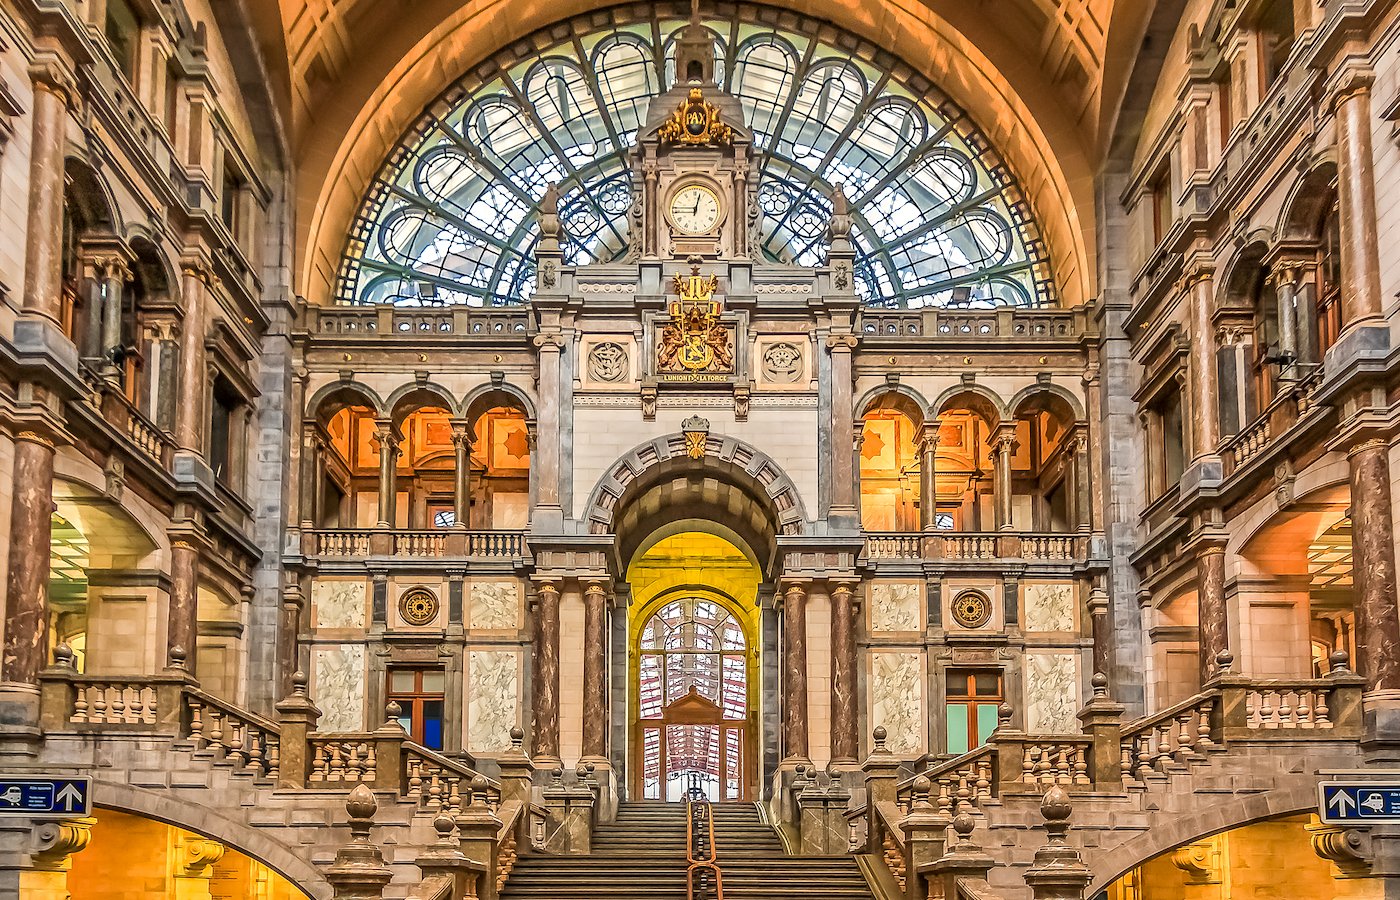 The Most Beautiful Old Train Stations in the World